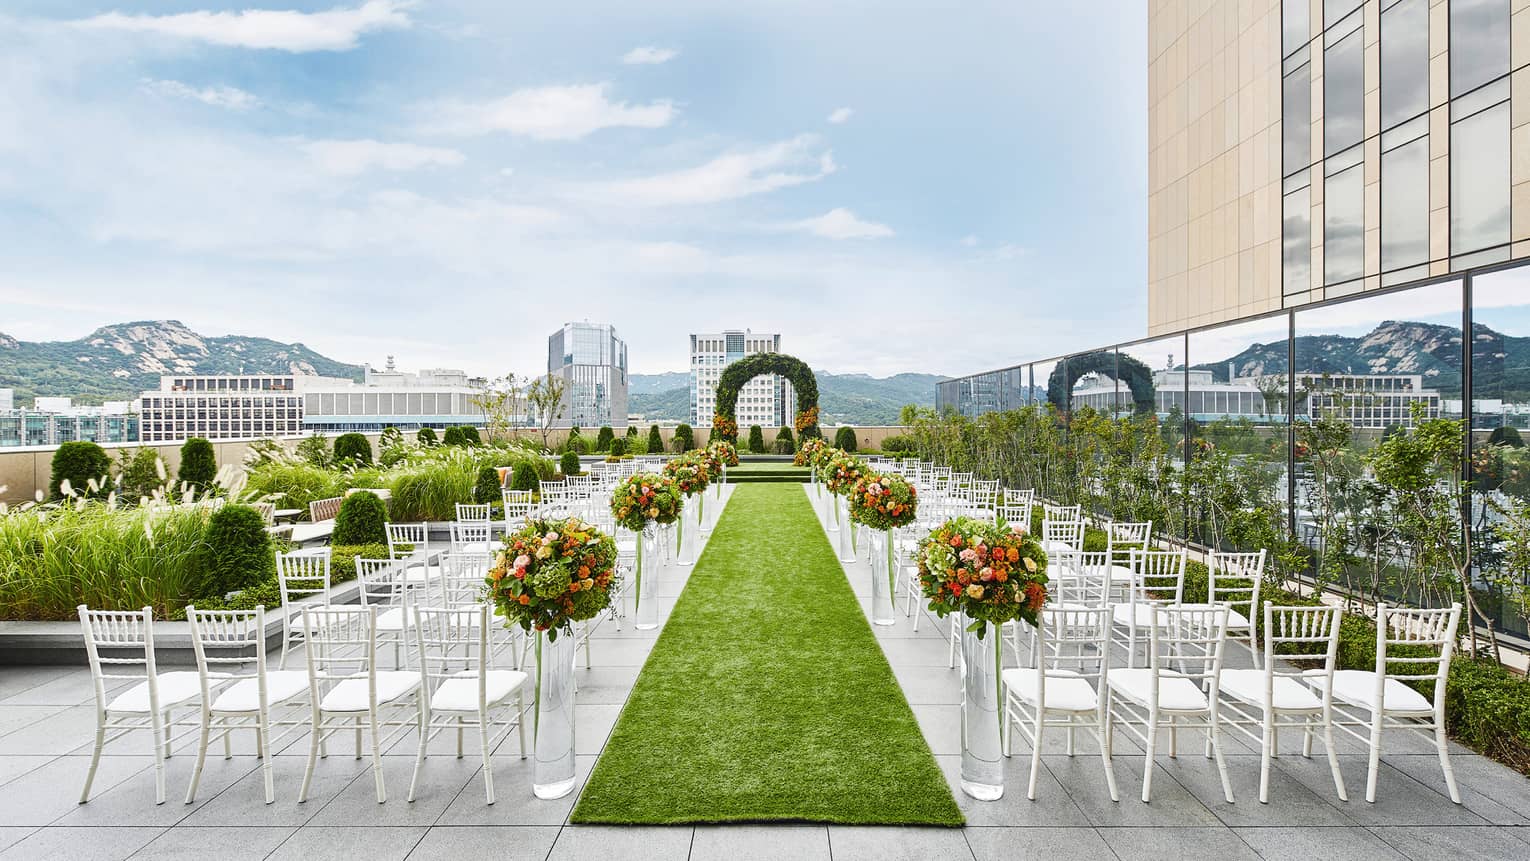 Rooftop patio wedding ceremony set up, rows of white chairs and green aisle facing altar